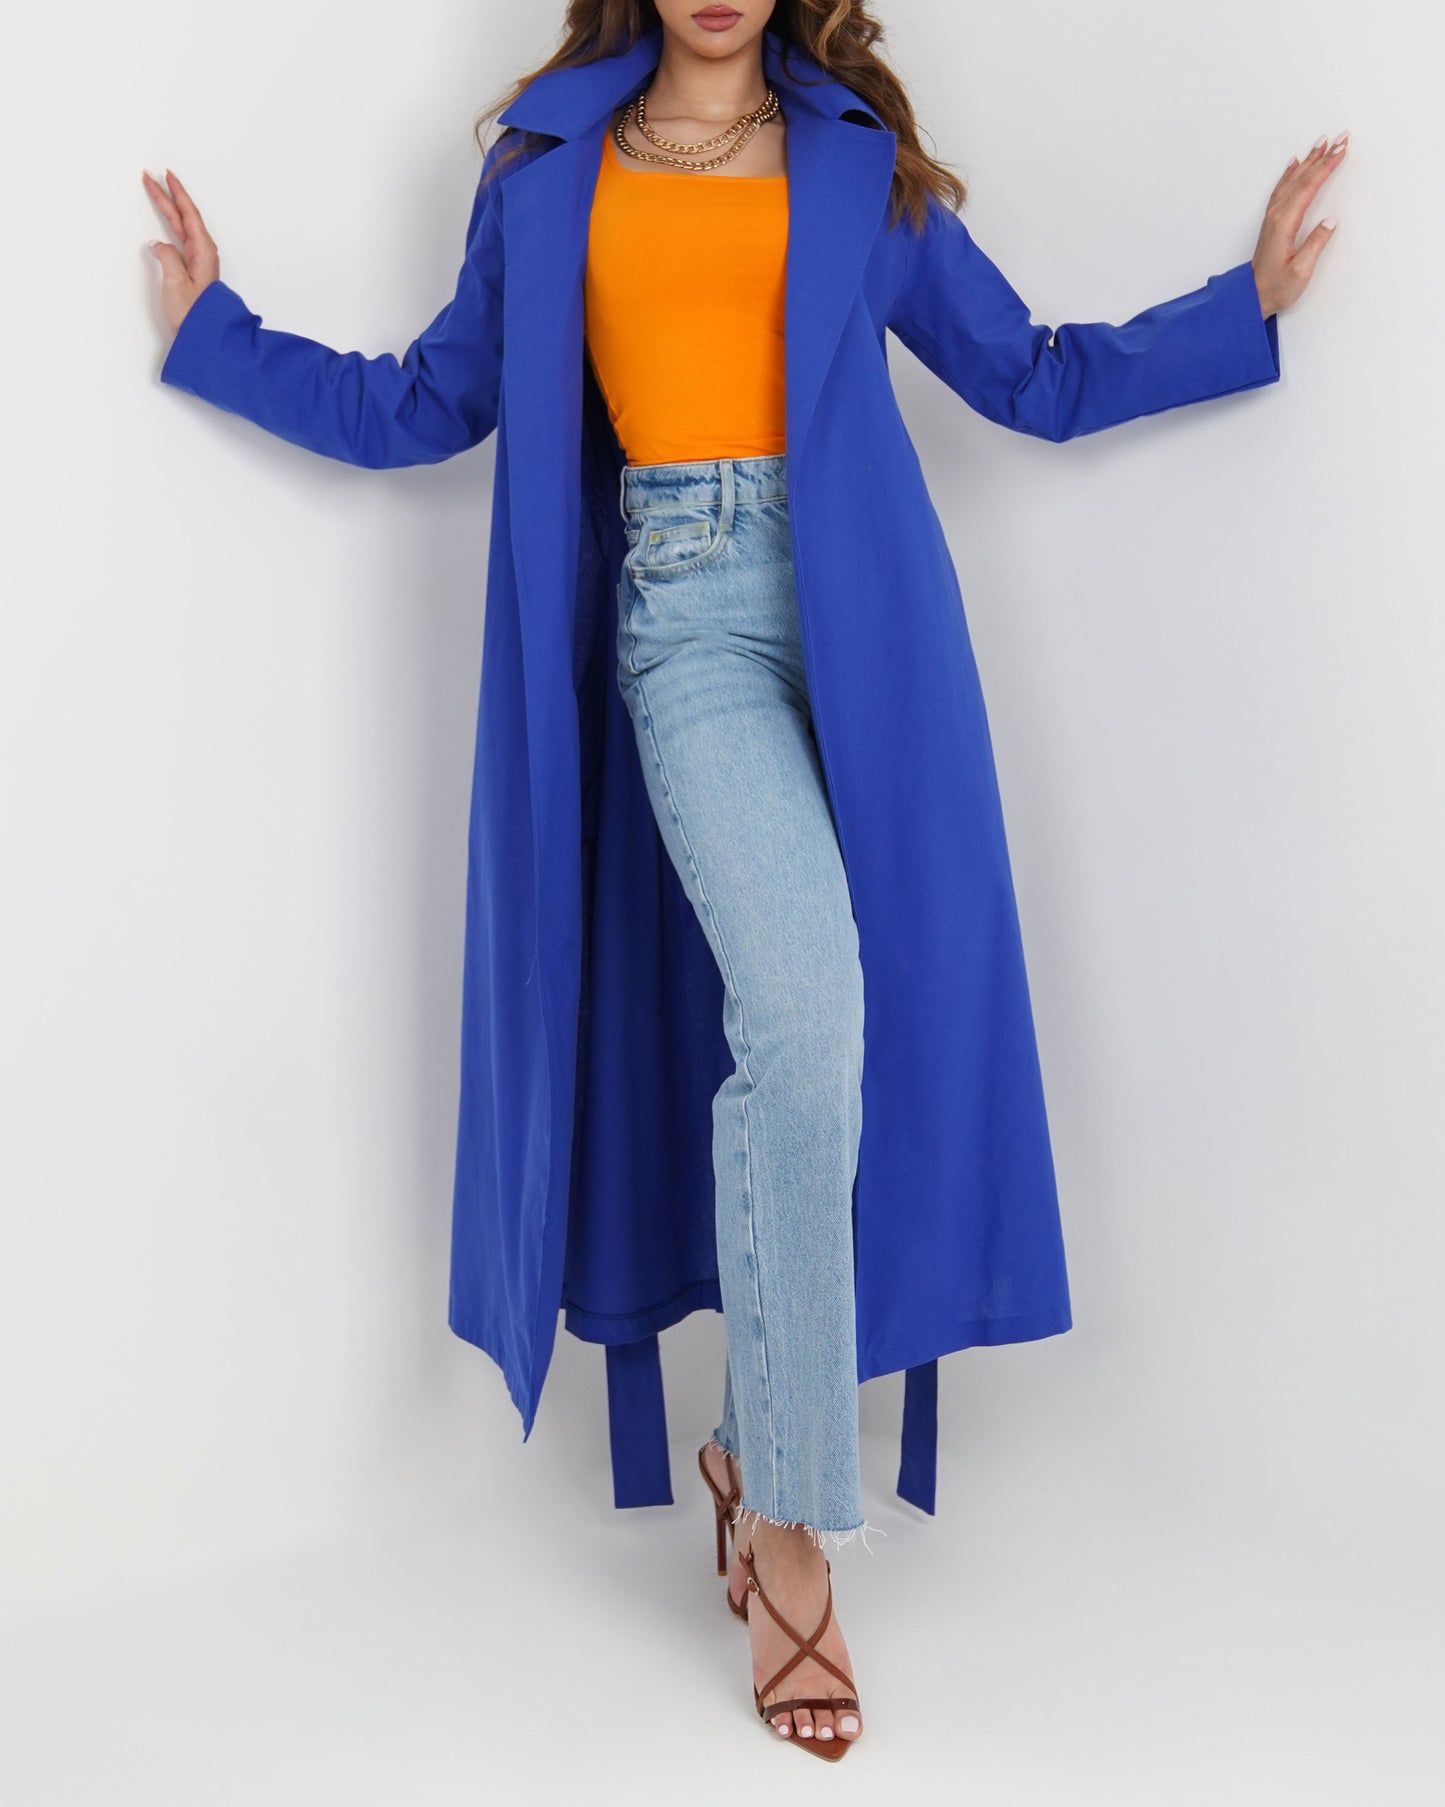 Long line trench coat in royal blue